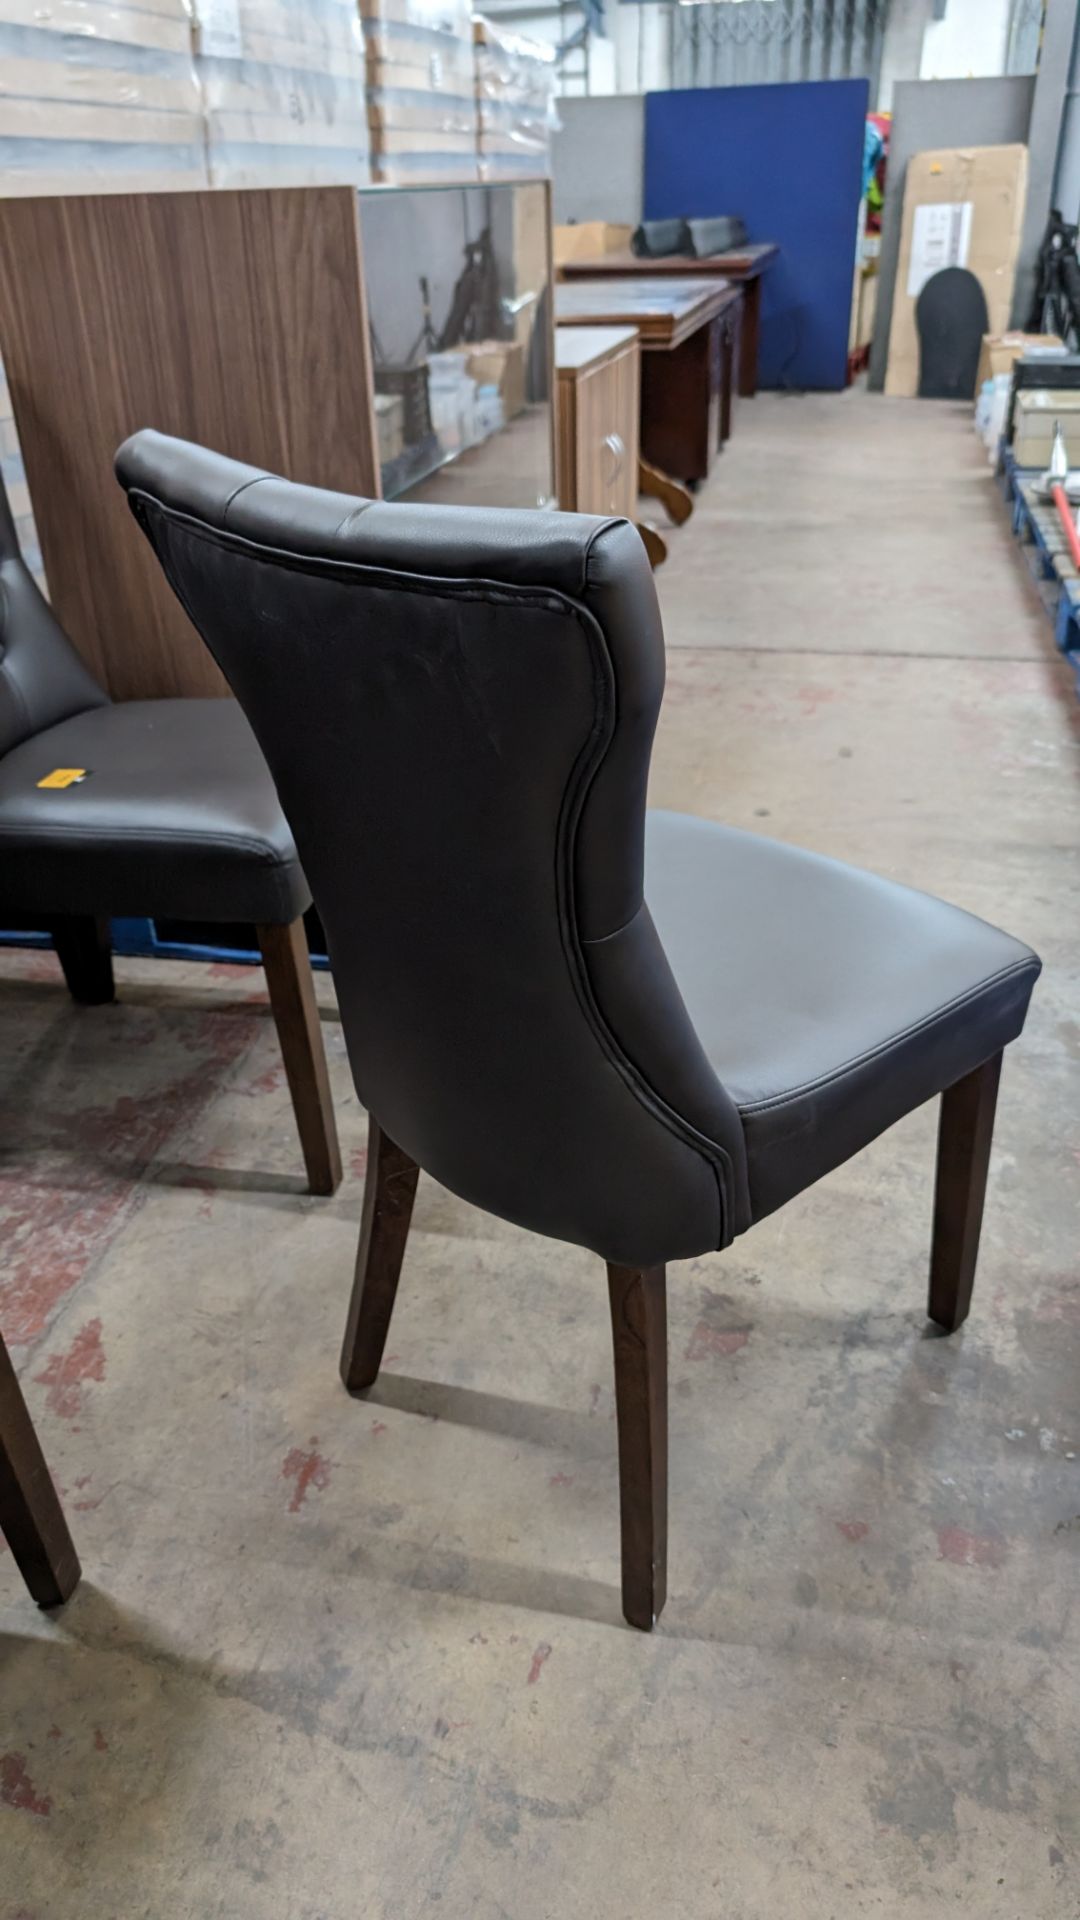 8 off matching pleather dark brown dining chairs - Image 6 of 7